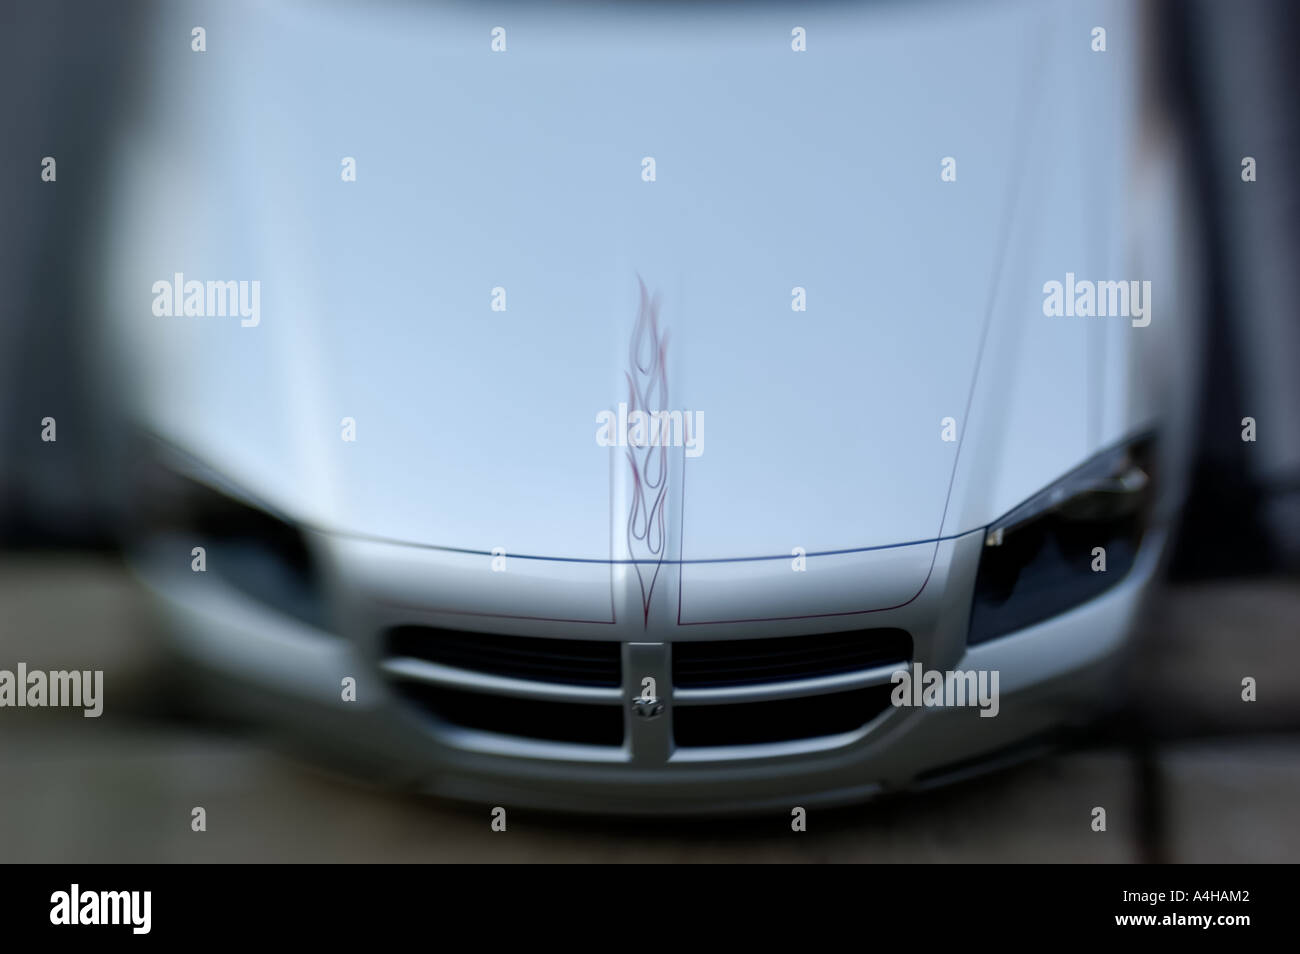 Dodge Magnum wagon. Top view of hood. Stock Photo